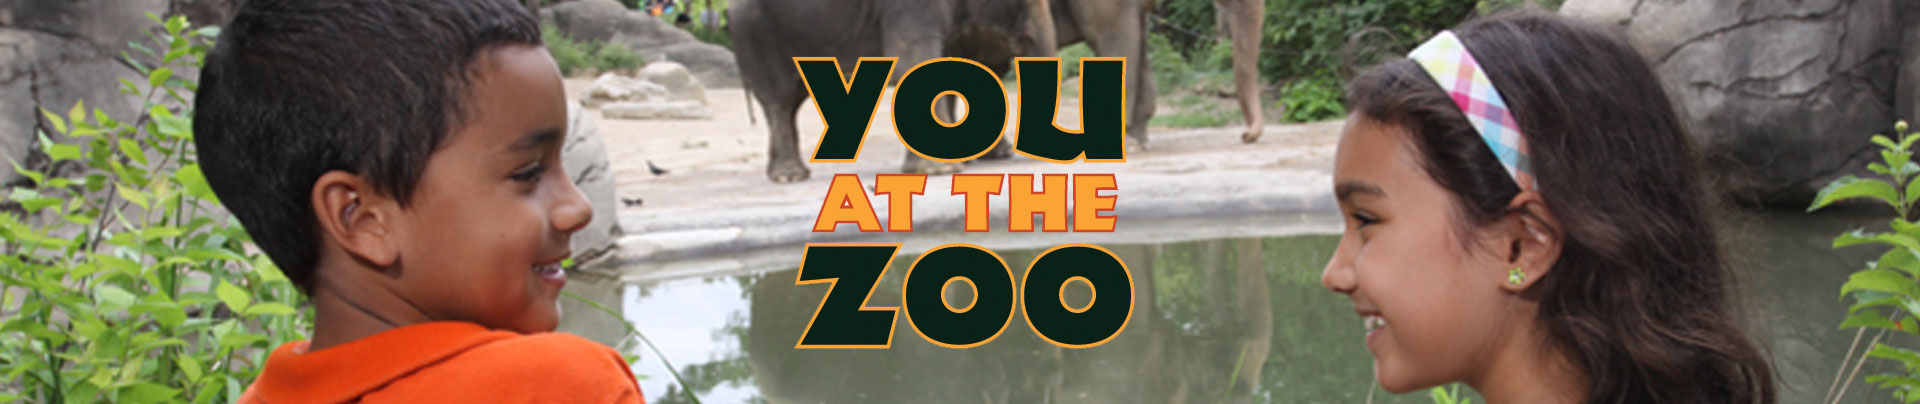 You at the Zoo